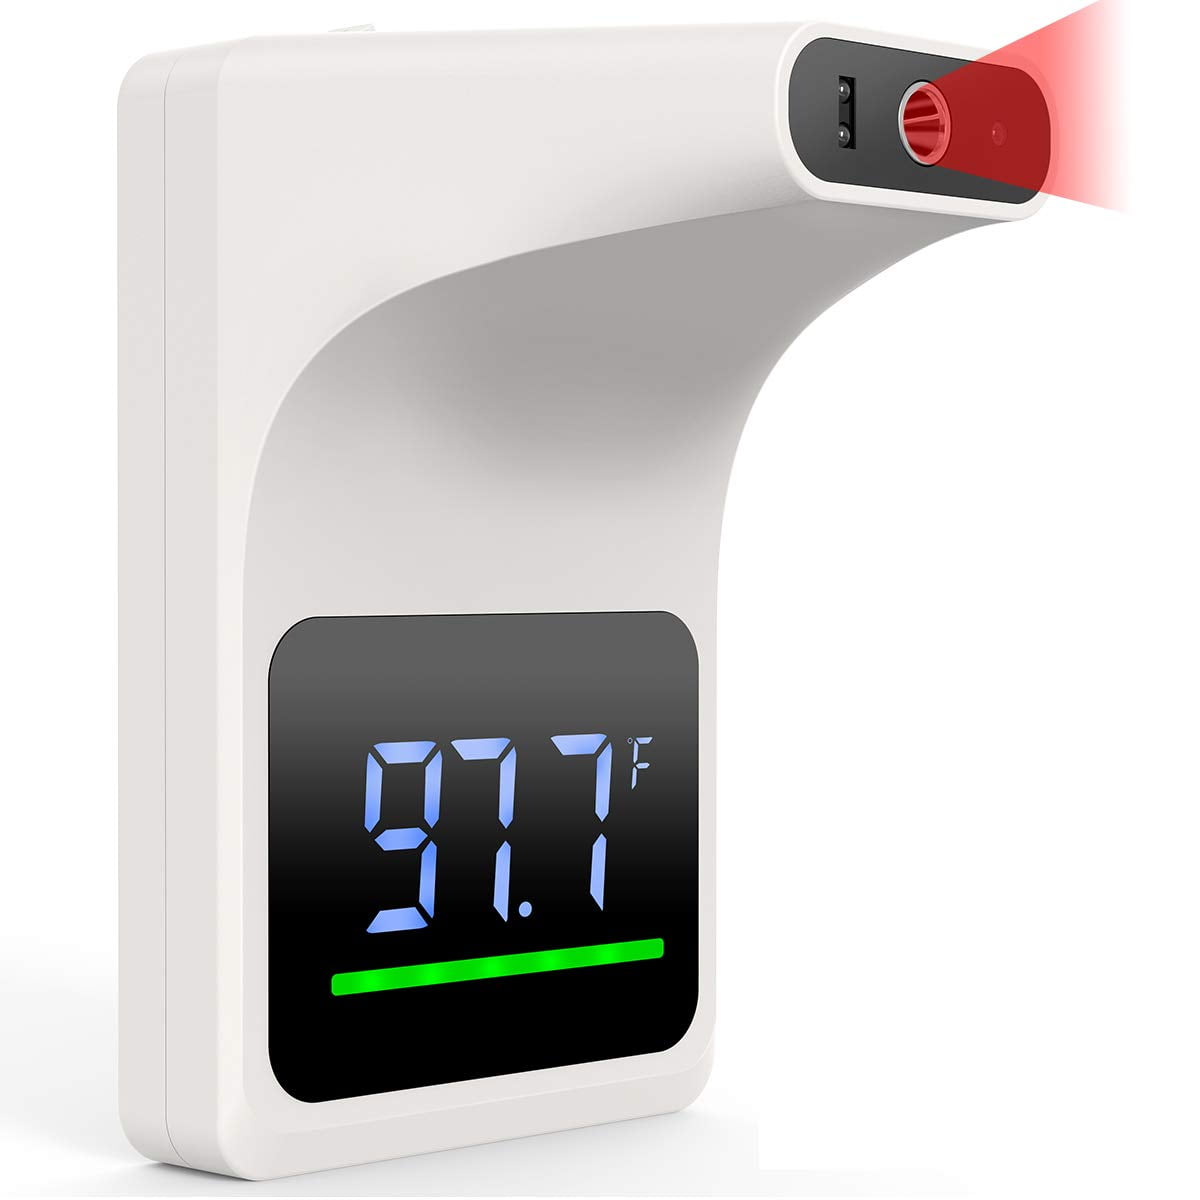 Digital Non-contact Automatic Fever Alarm Thermometer Wall Mounted Thermometer